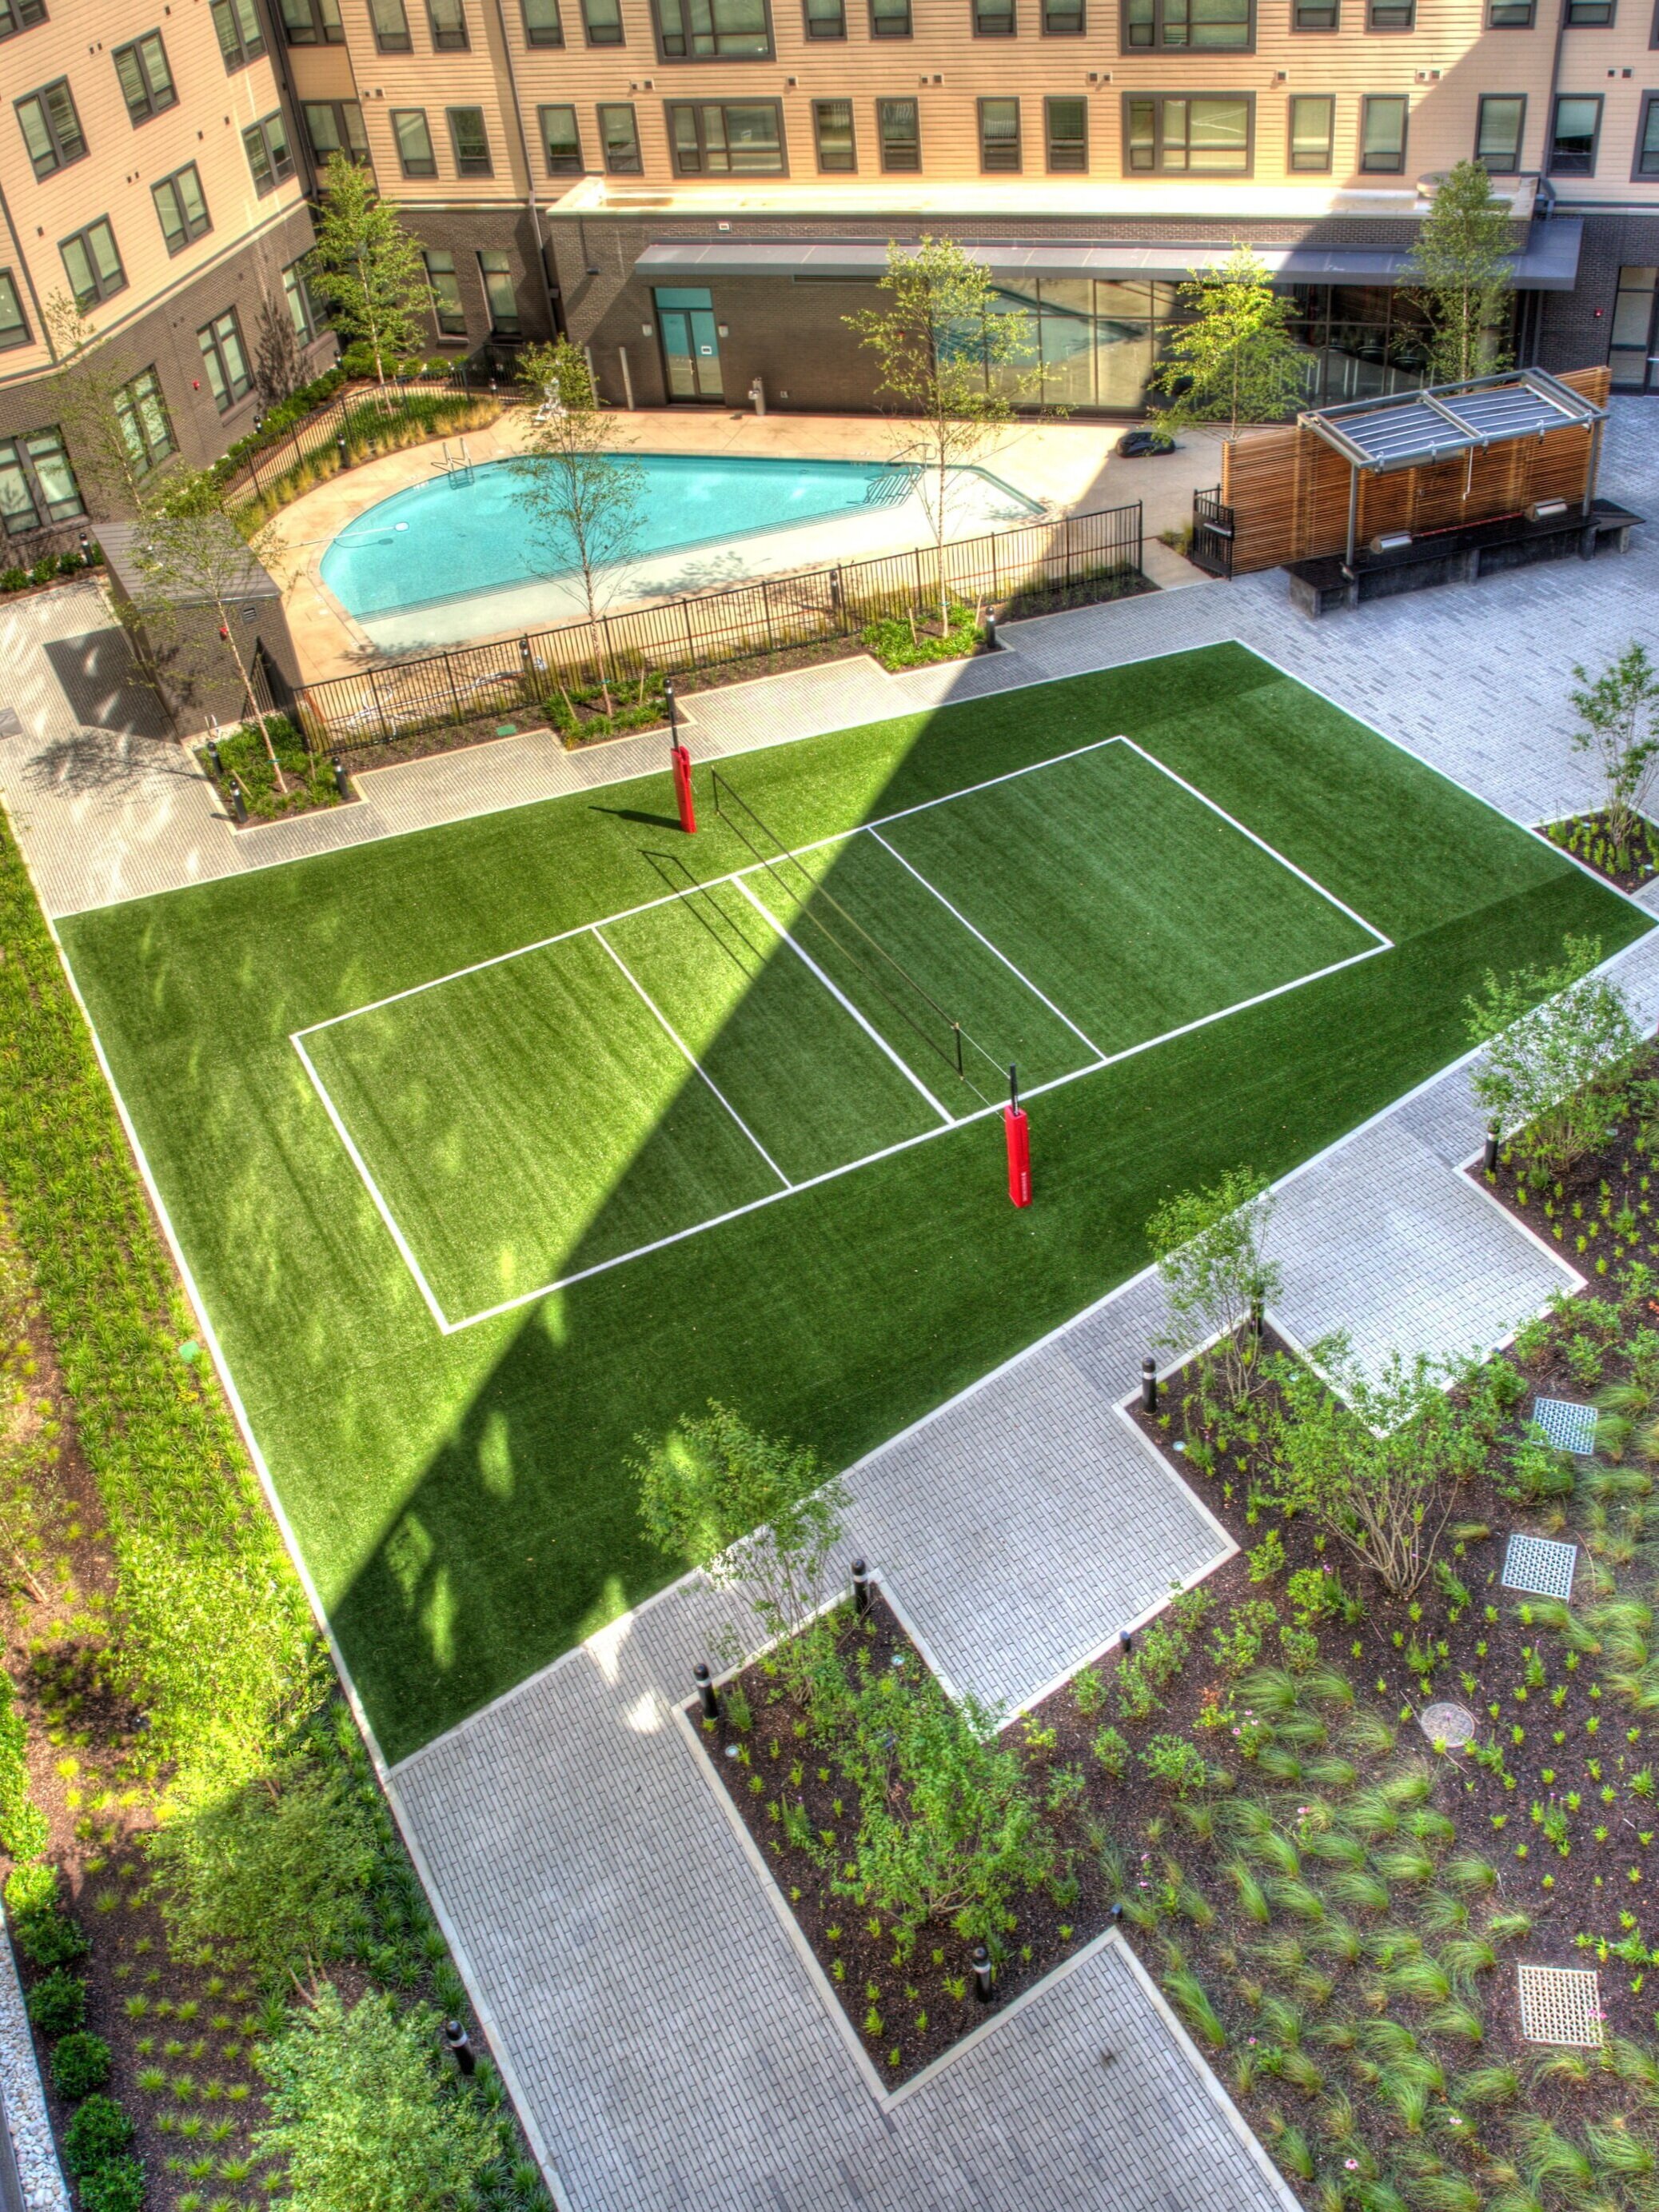   An aerial view of one of the amenity courtyards with view of the pool and volleyball court.  